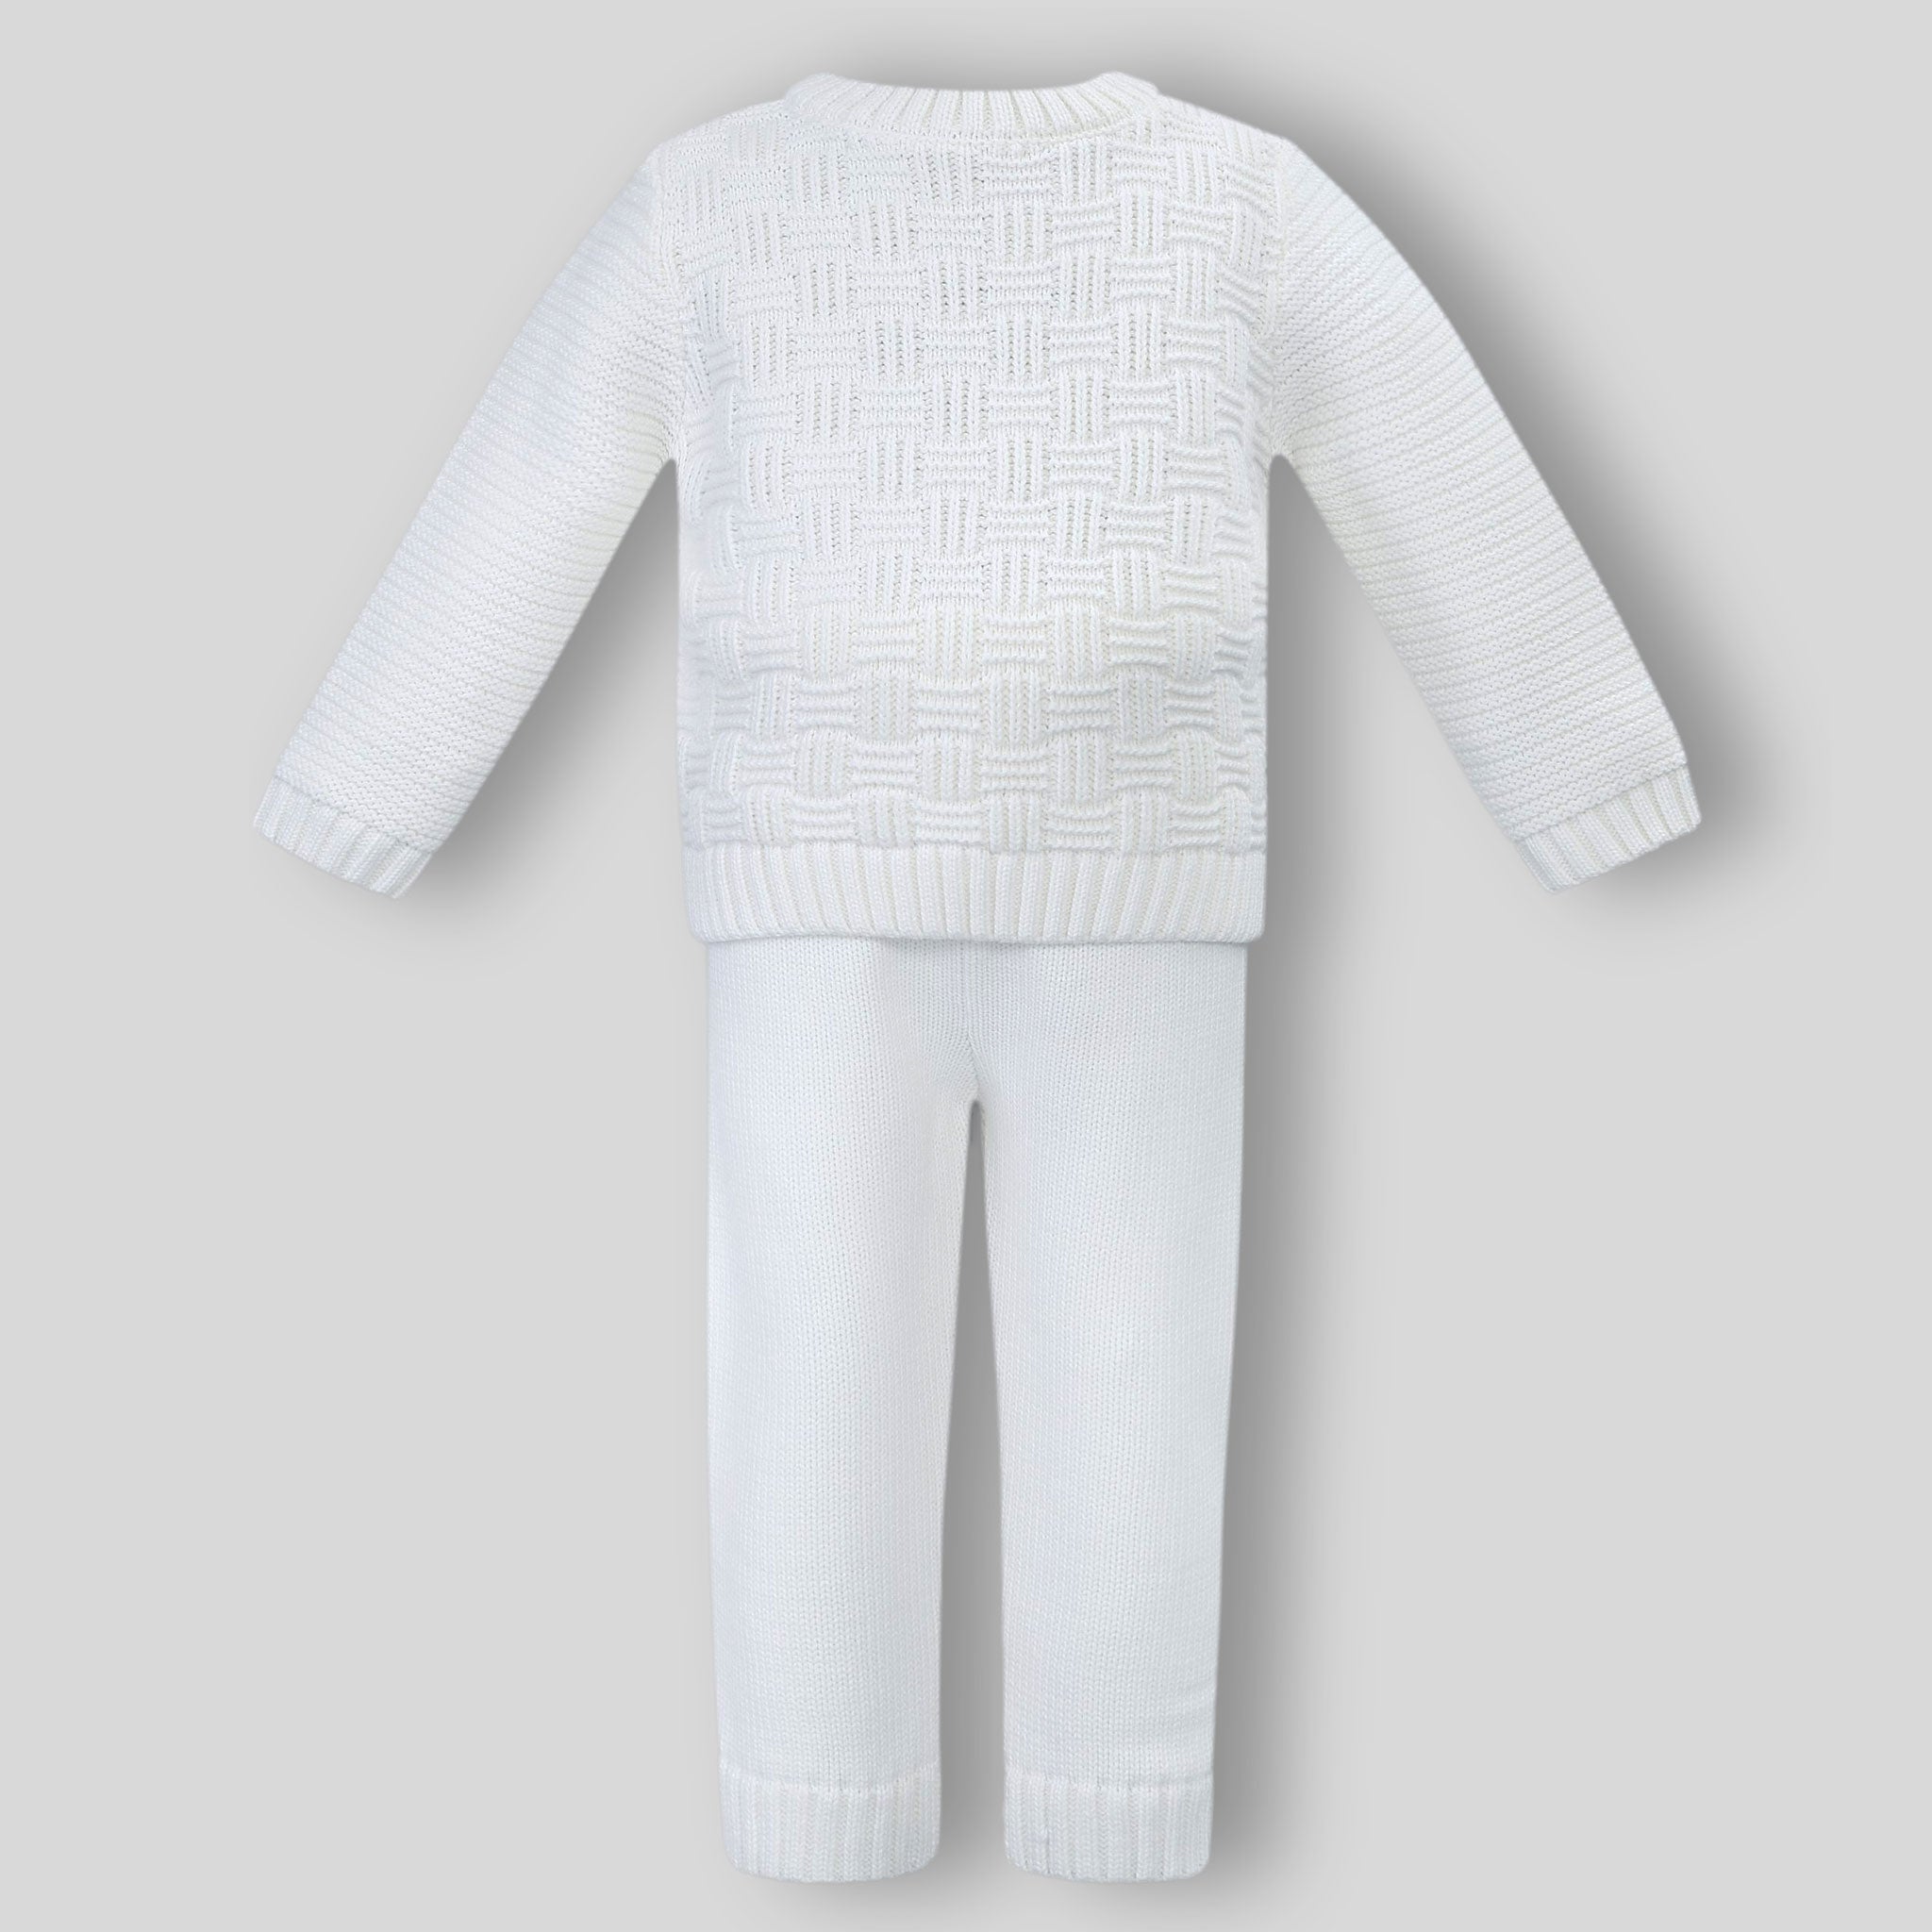 baby unisex knitted outfit with shirt and trousers white